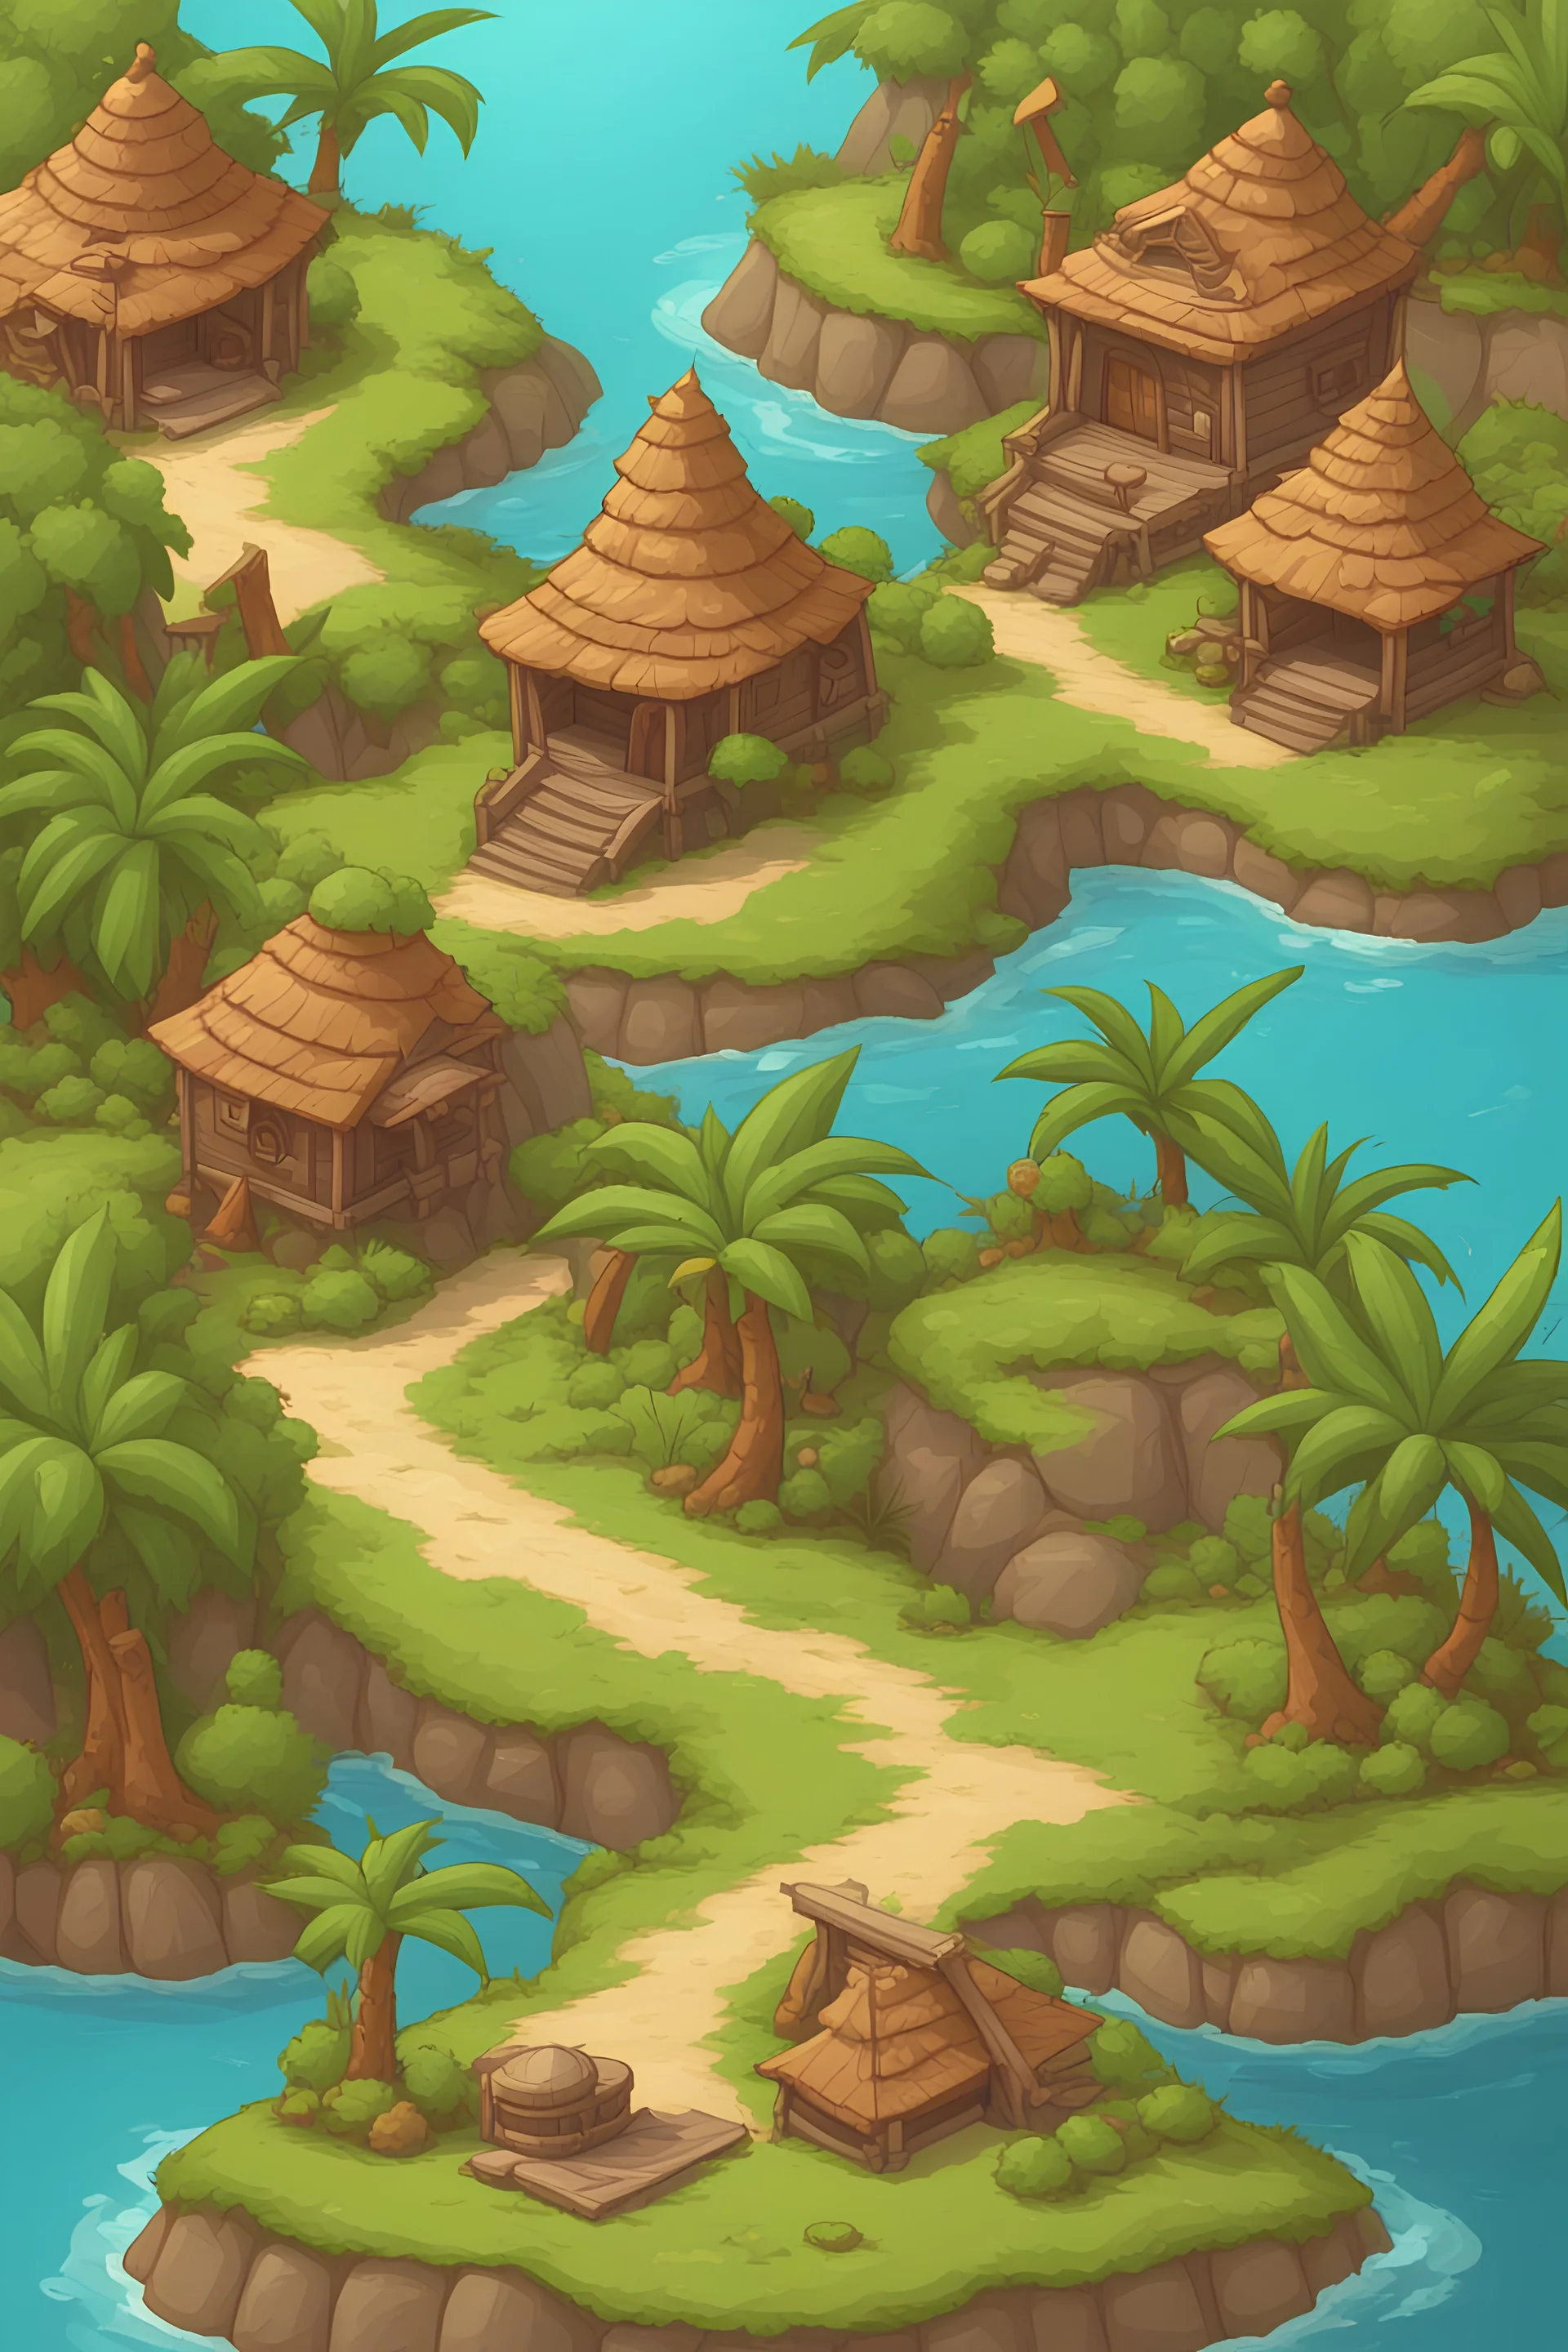 The back side of a card for events in a game based on a tropical inhabited island. fantasy cartoon style.